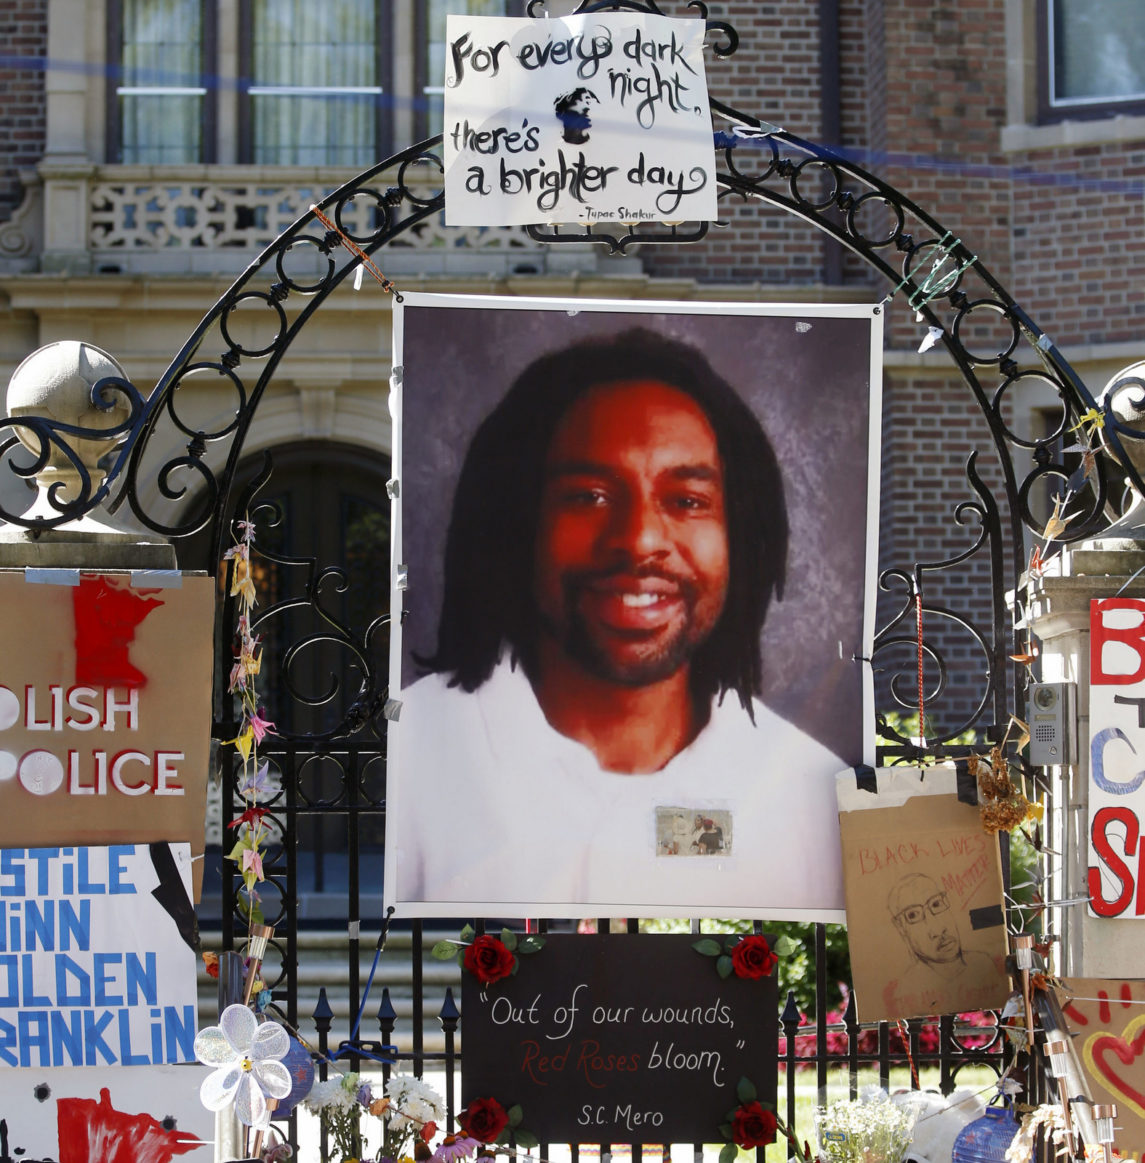 Cop Who Killed Philando Castile Claims Smell Of Pot Made Him Fear For His Life